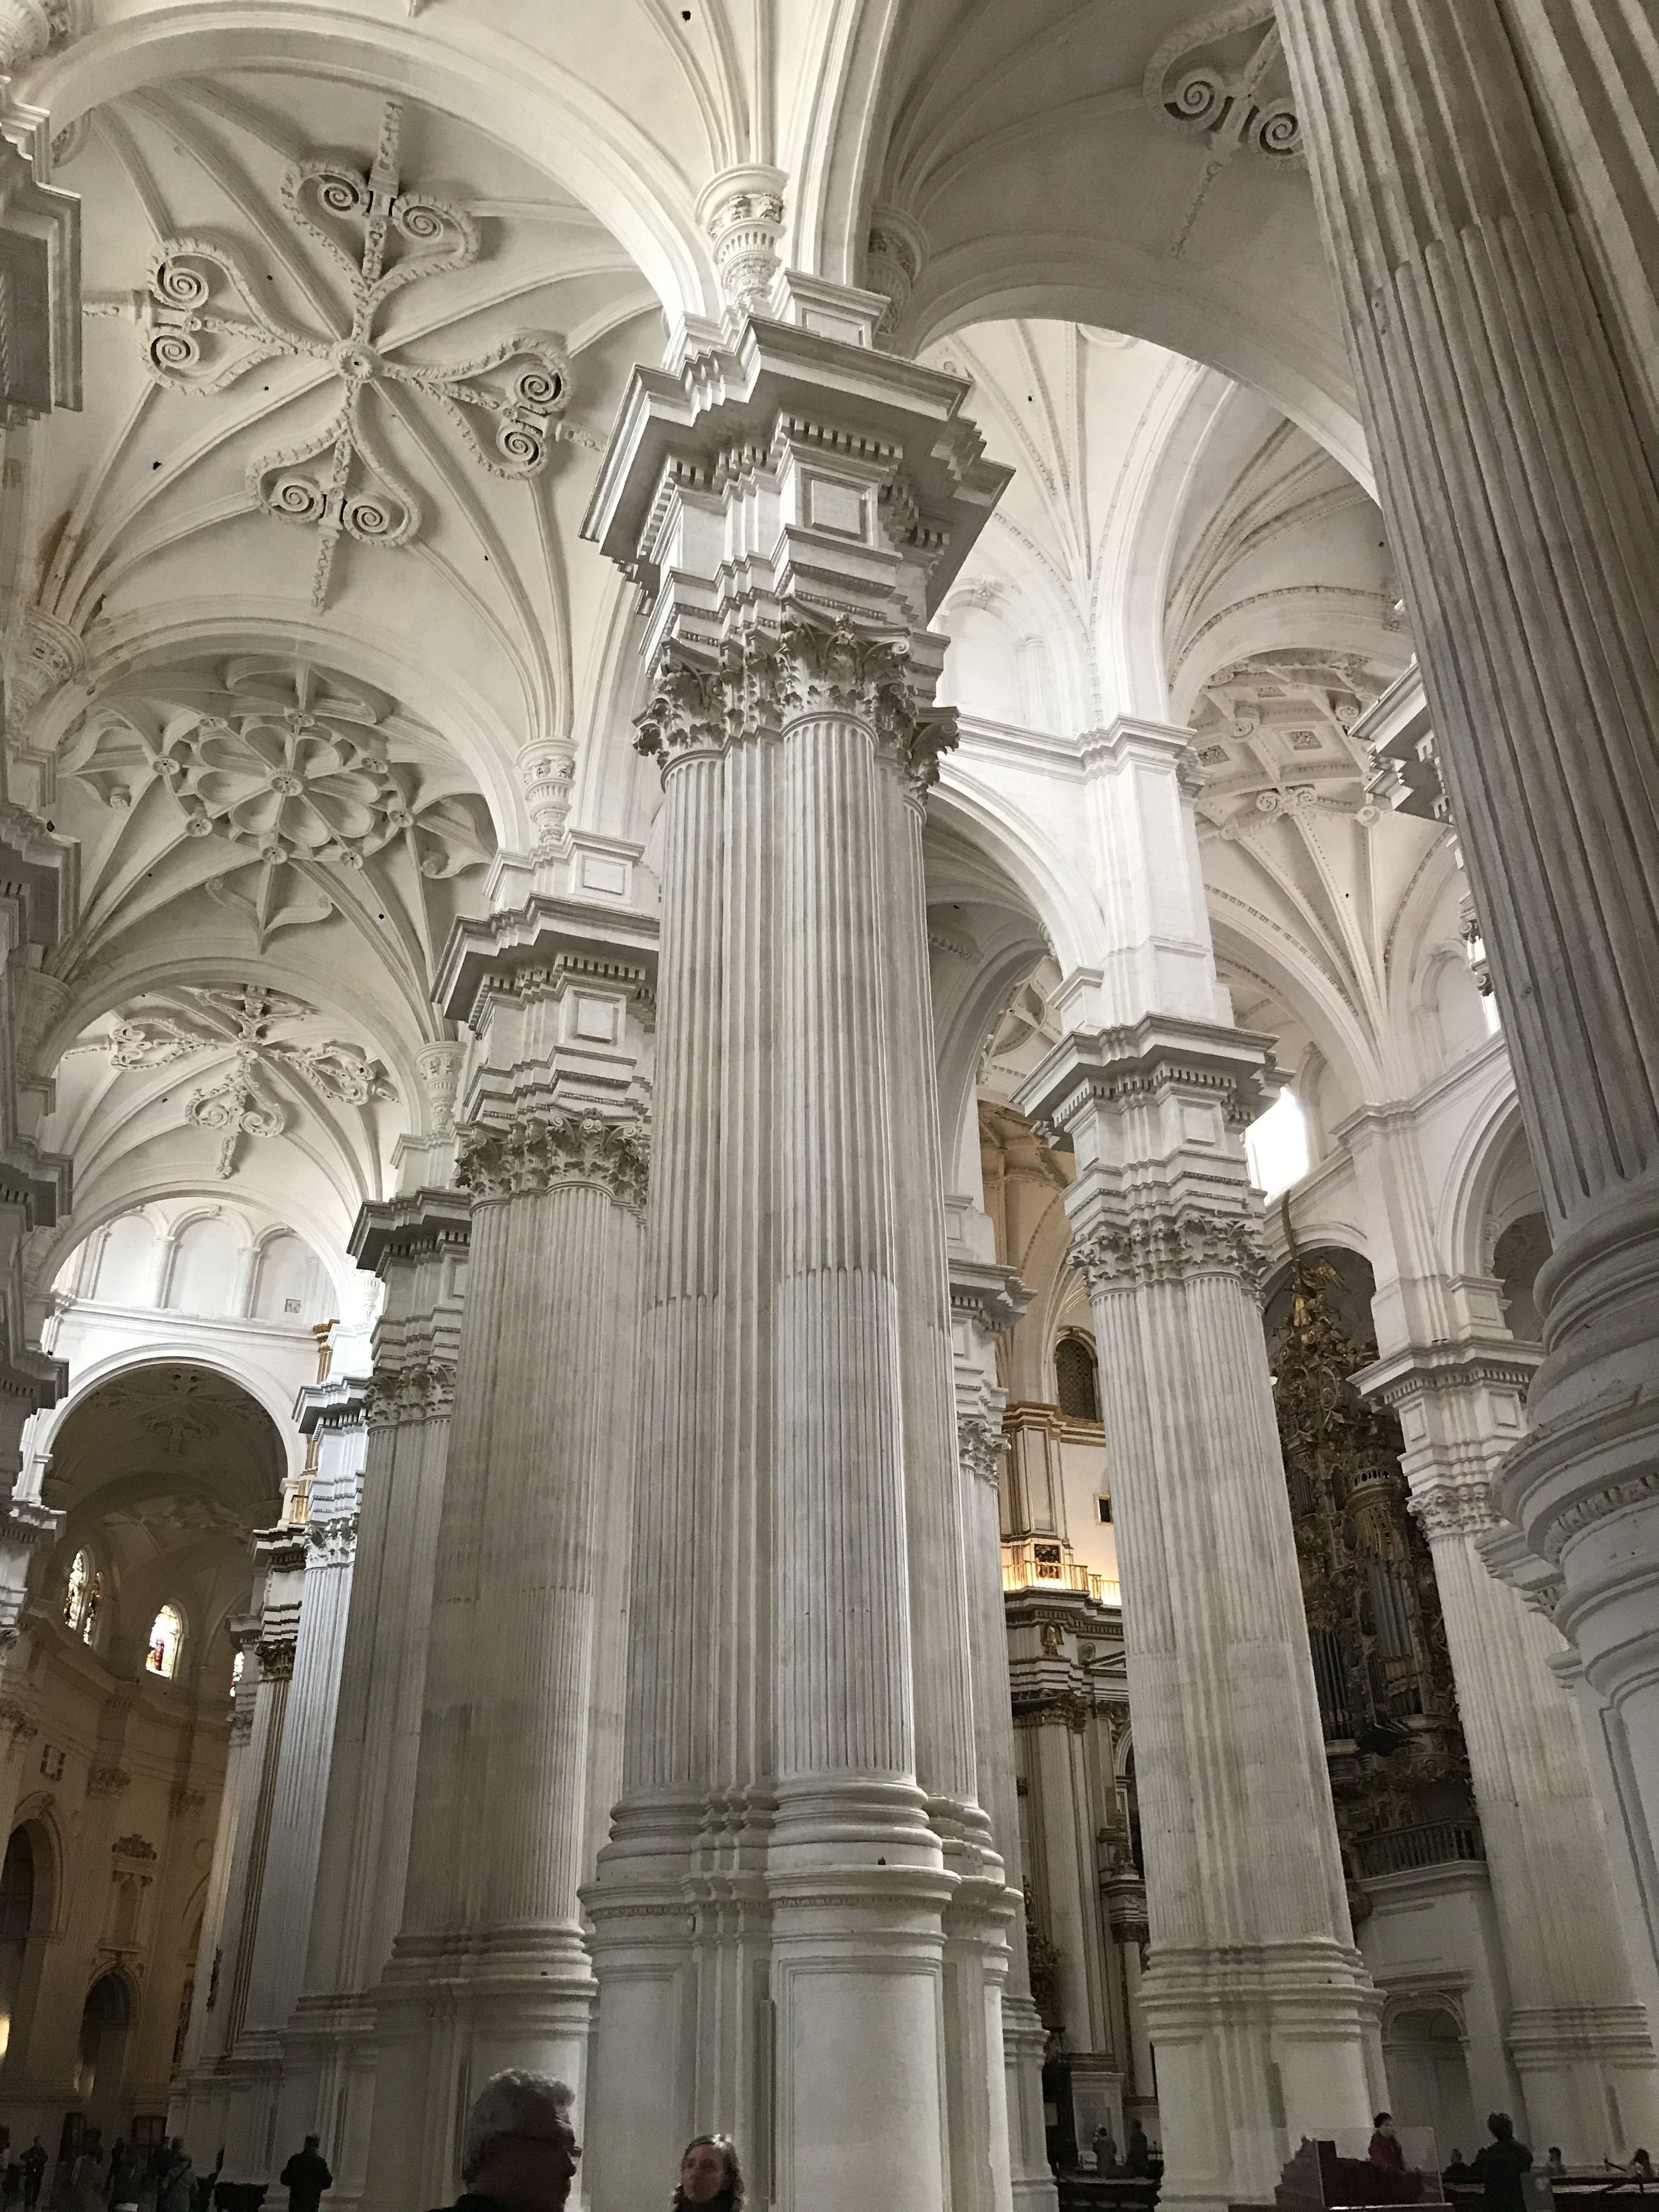 A large white column in the middle of a cathedral. - Light academia